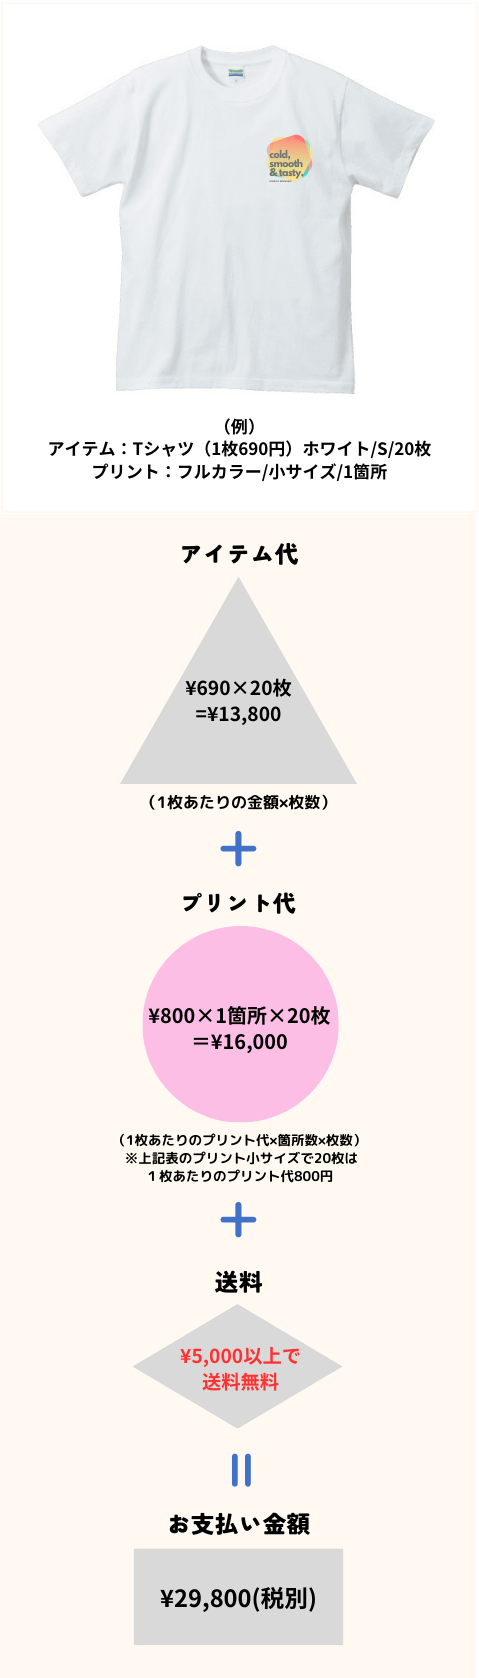 price_omakase_sp.png__PID:53c04888-57c6-49dd-821a-62c4e5c086d6